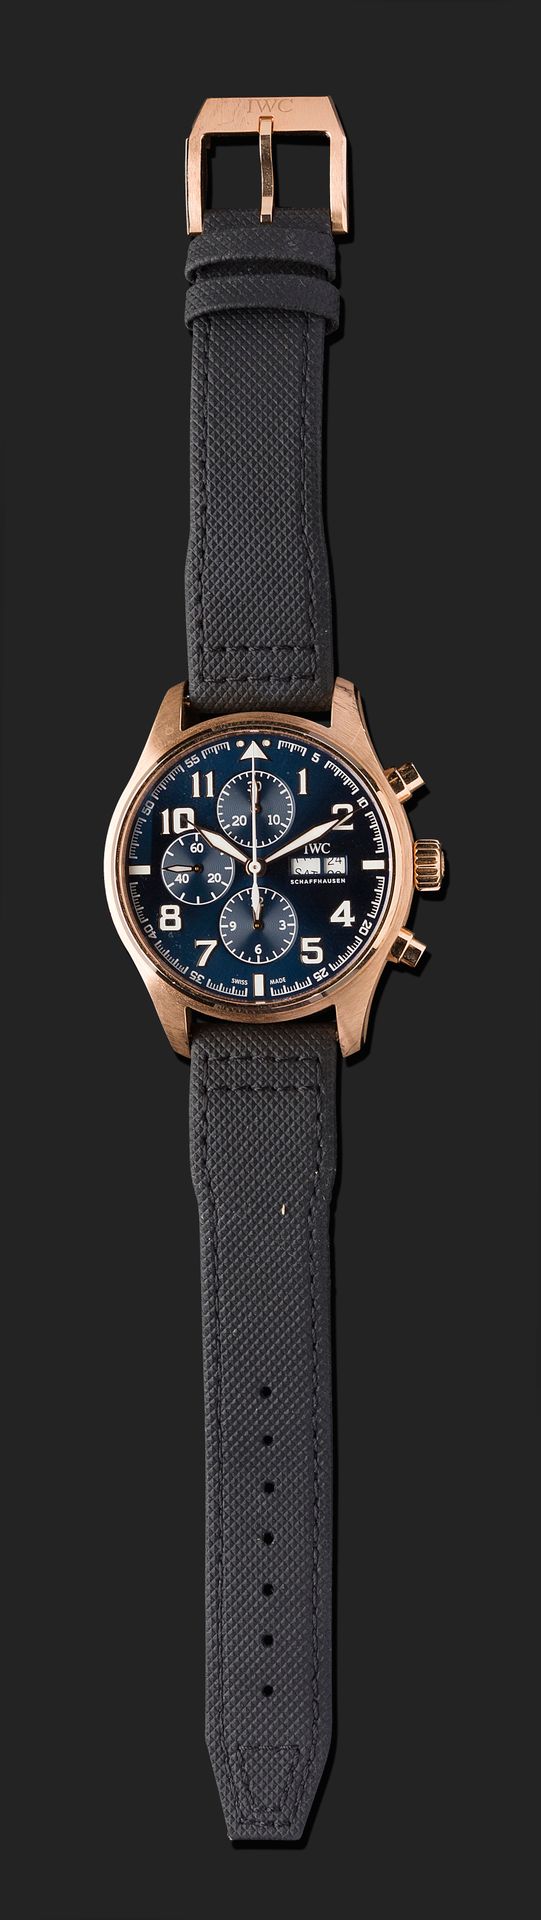 Null IWC
Pilot Chronograph "The Little Prince
Number 5443087, N°32/250.
Beautifu&hellip;